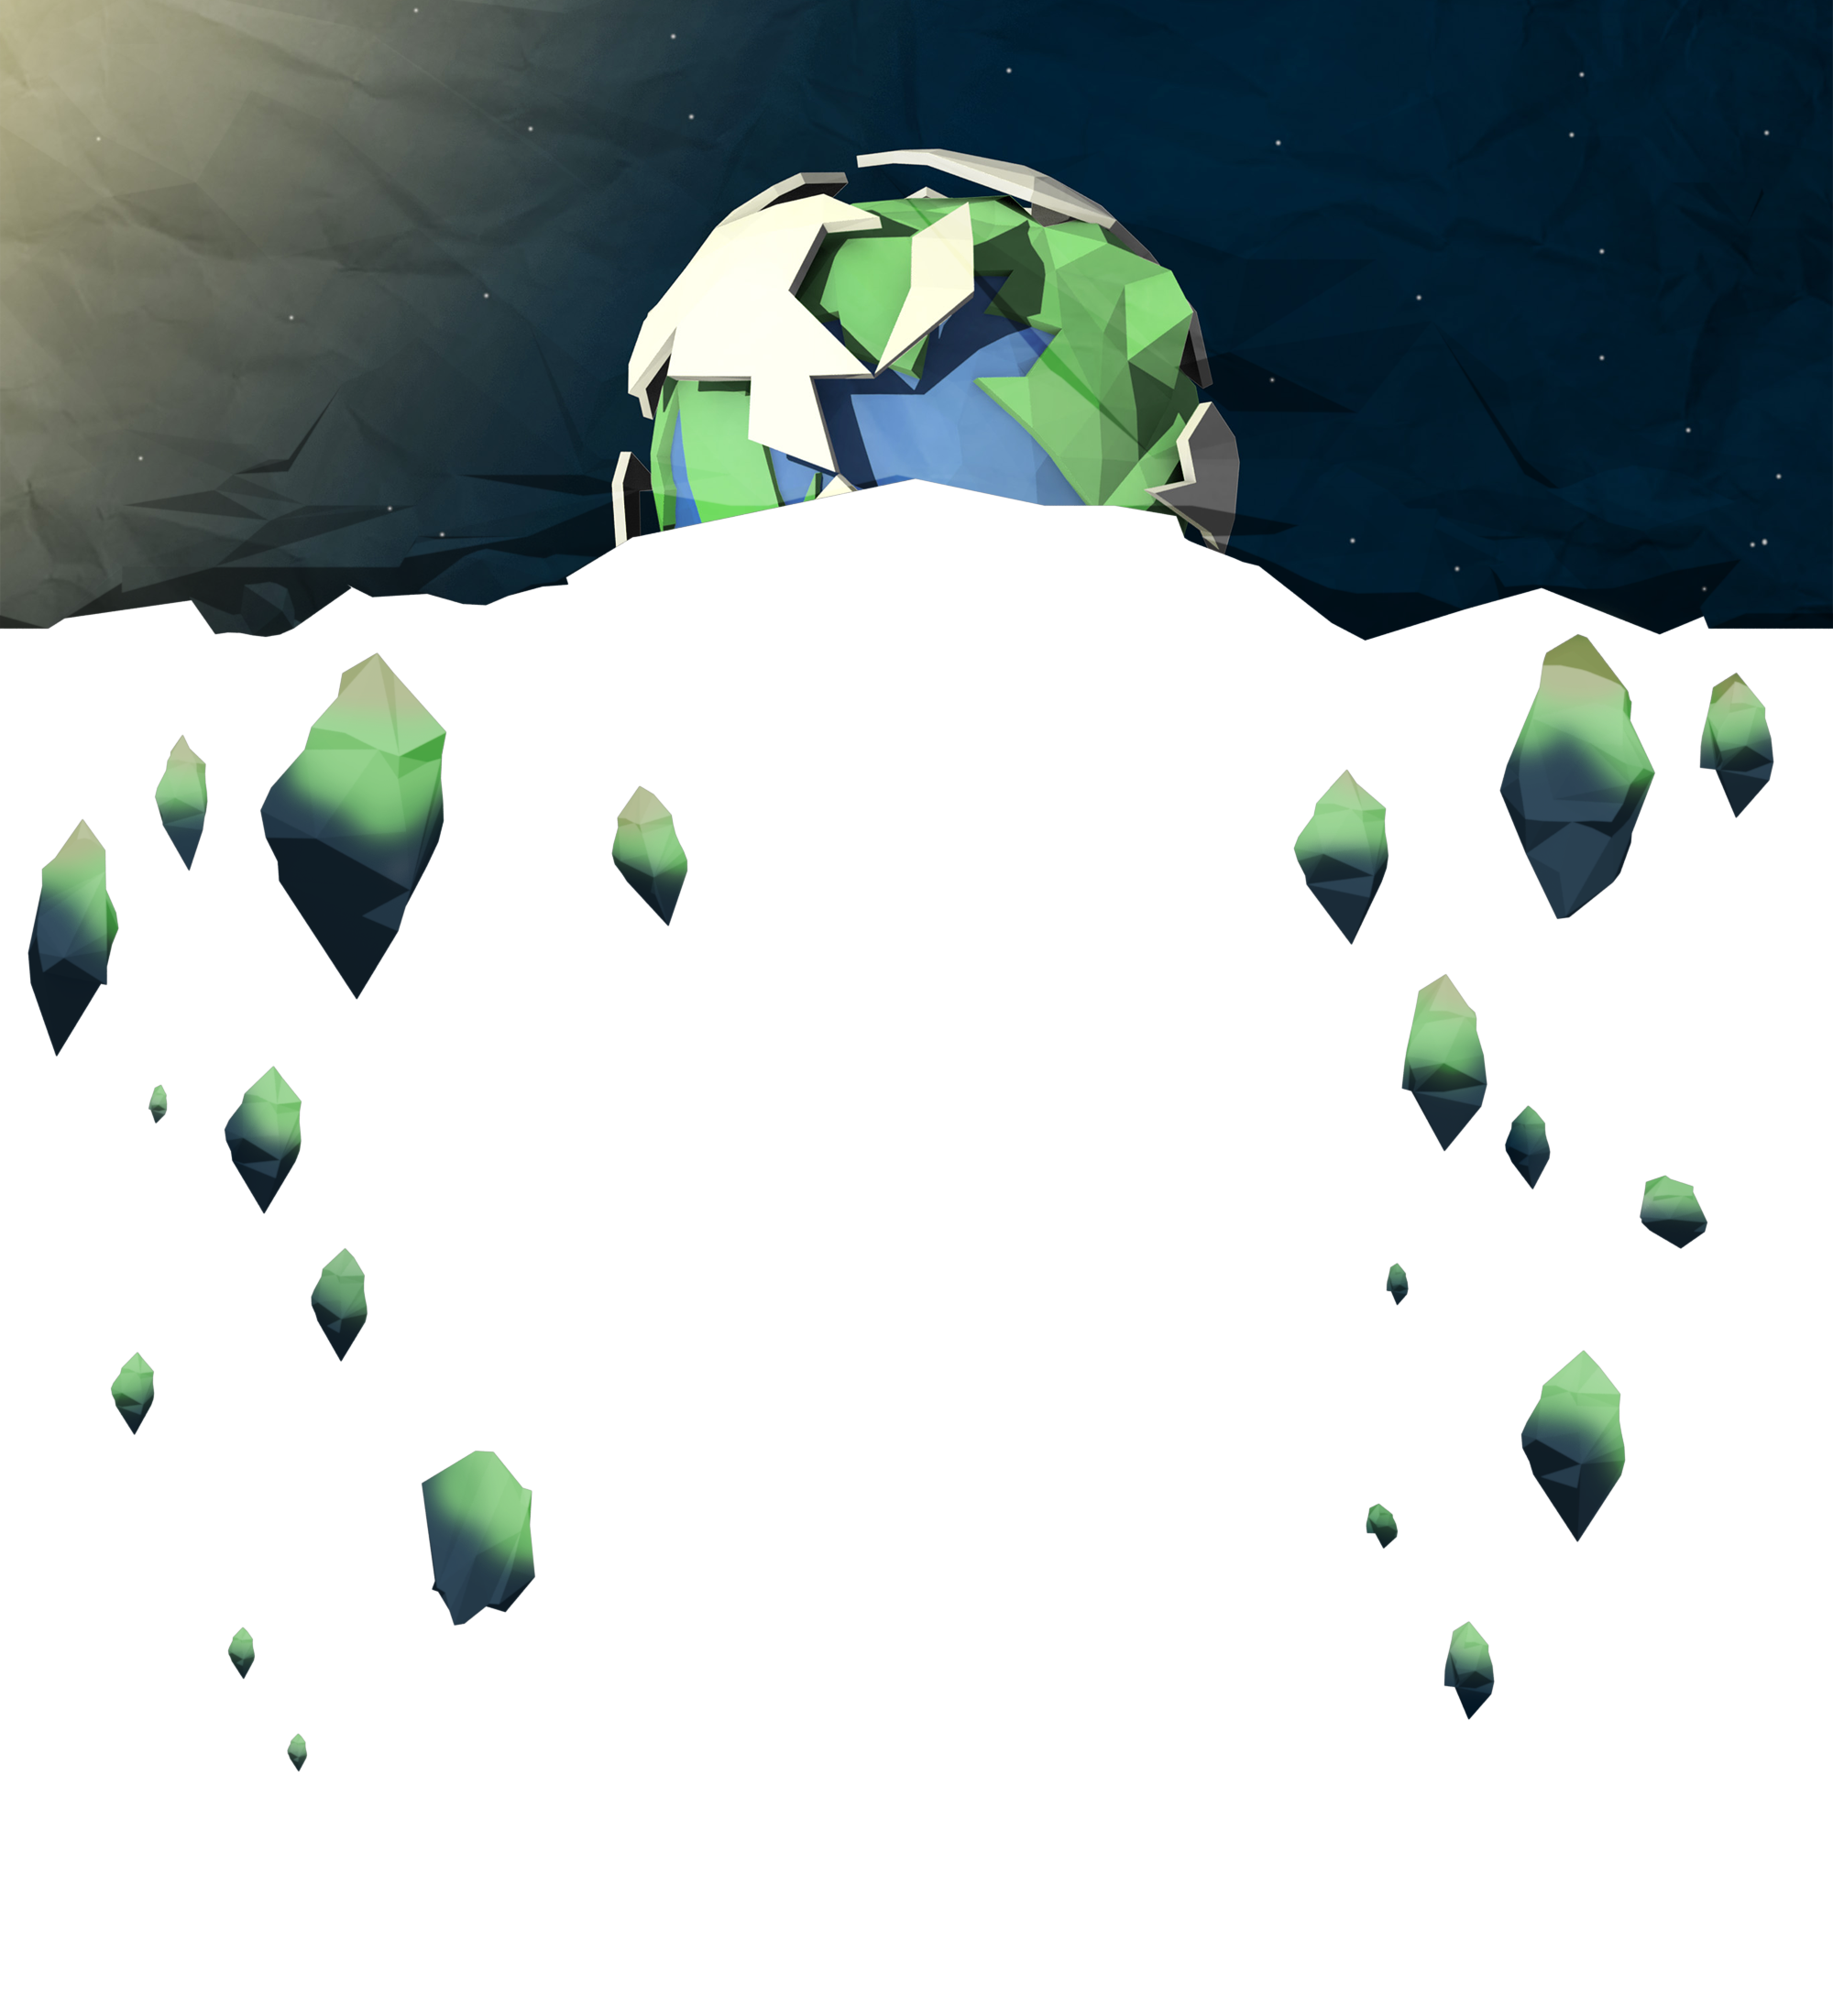 A low-poly 3D model of Earth in outer space, overlayed into a crumbling header image